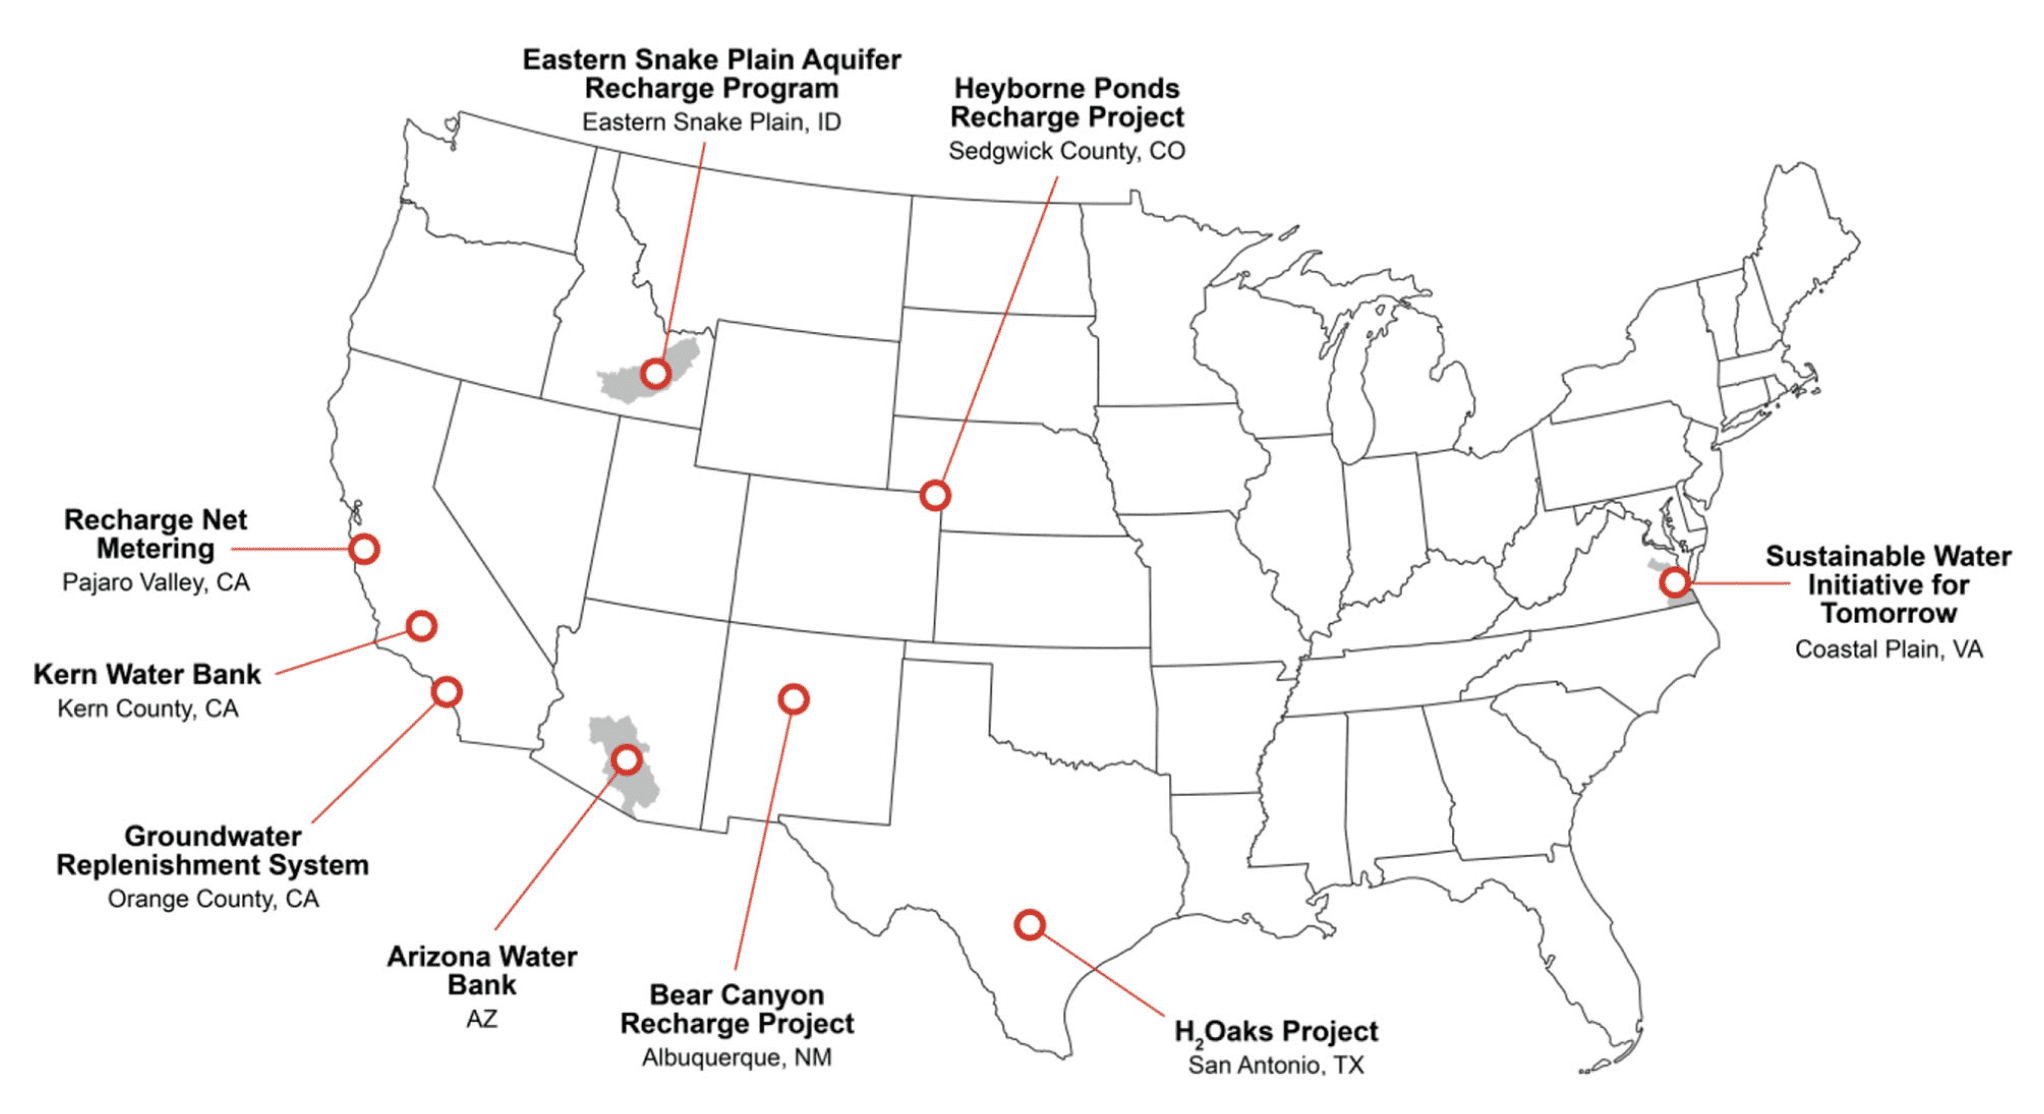 Map of the United States showing the geographic distribution of the case studies in the special collection. There are 3 in California and one each in Arizona, New Mexico, Texas, Colorado, Idaho, and Virginia.